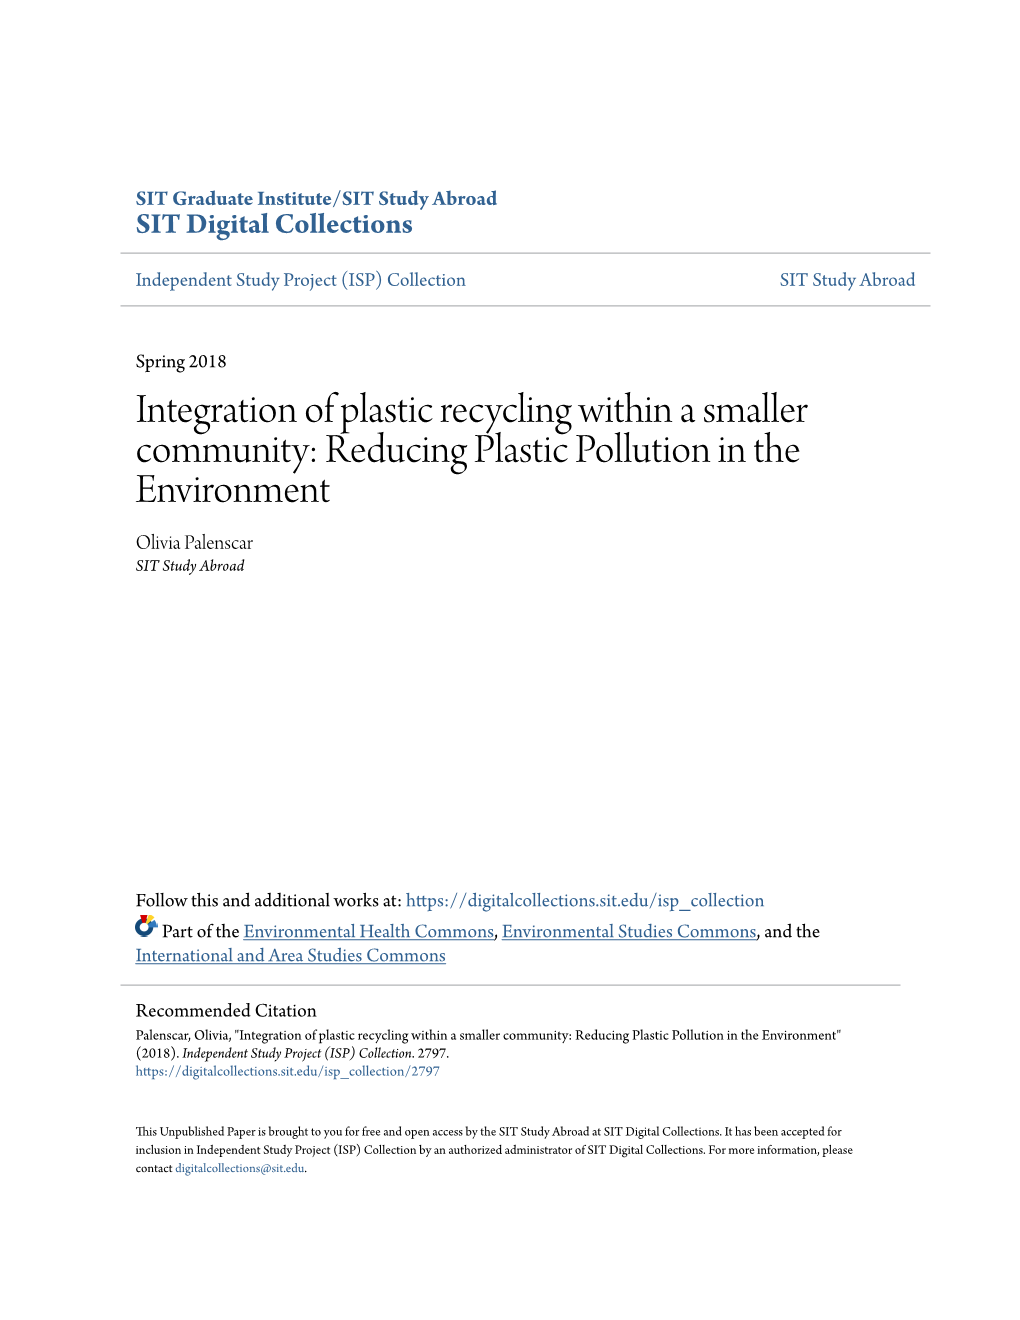 Integration of Plastic Recycling Within a Smaller Community: Reducing Plastic Pollution in the Environment Olivia Palenscar SIT Study Abroad